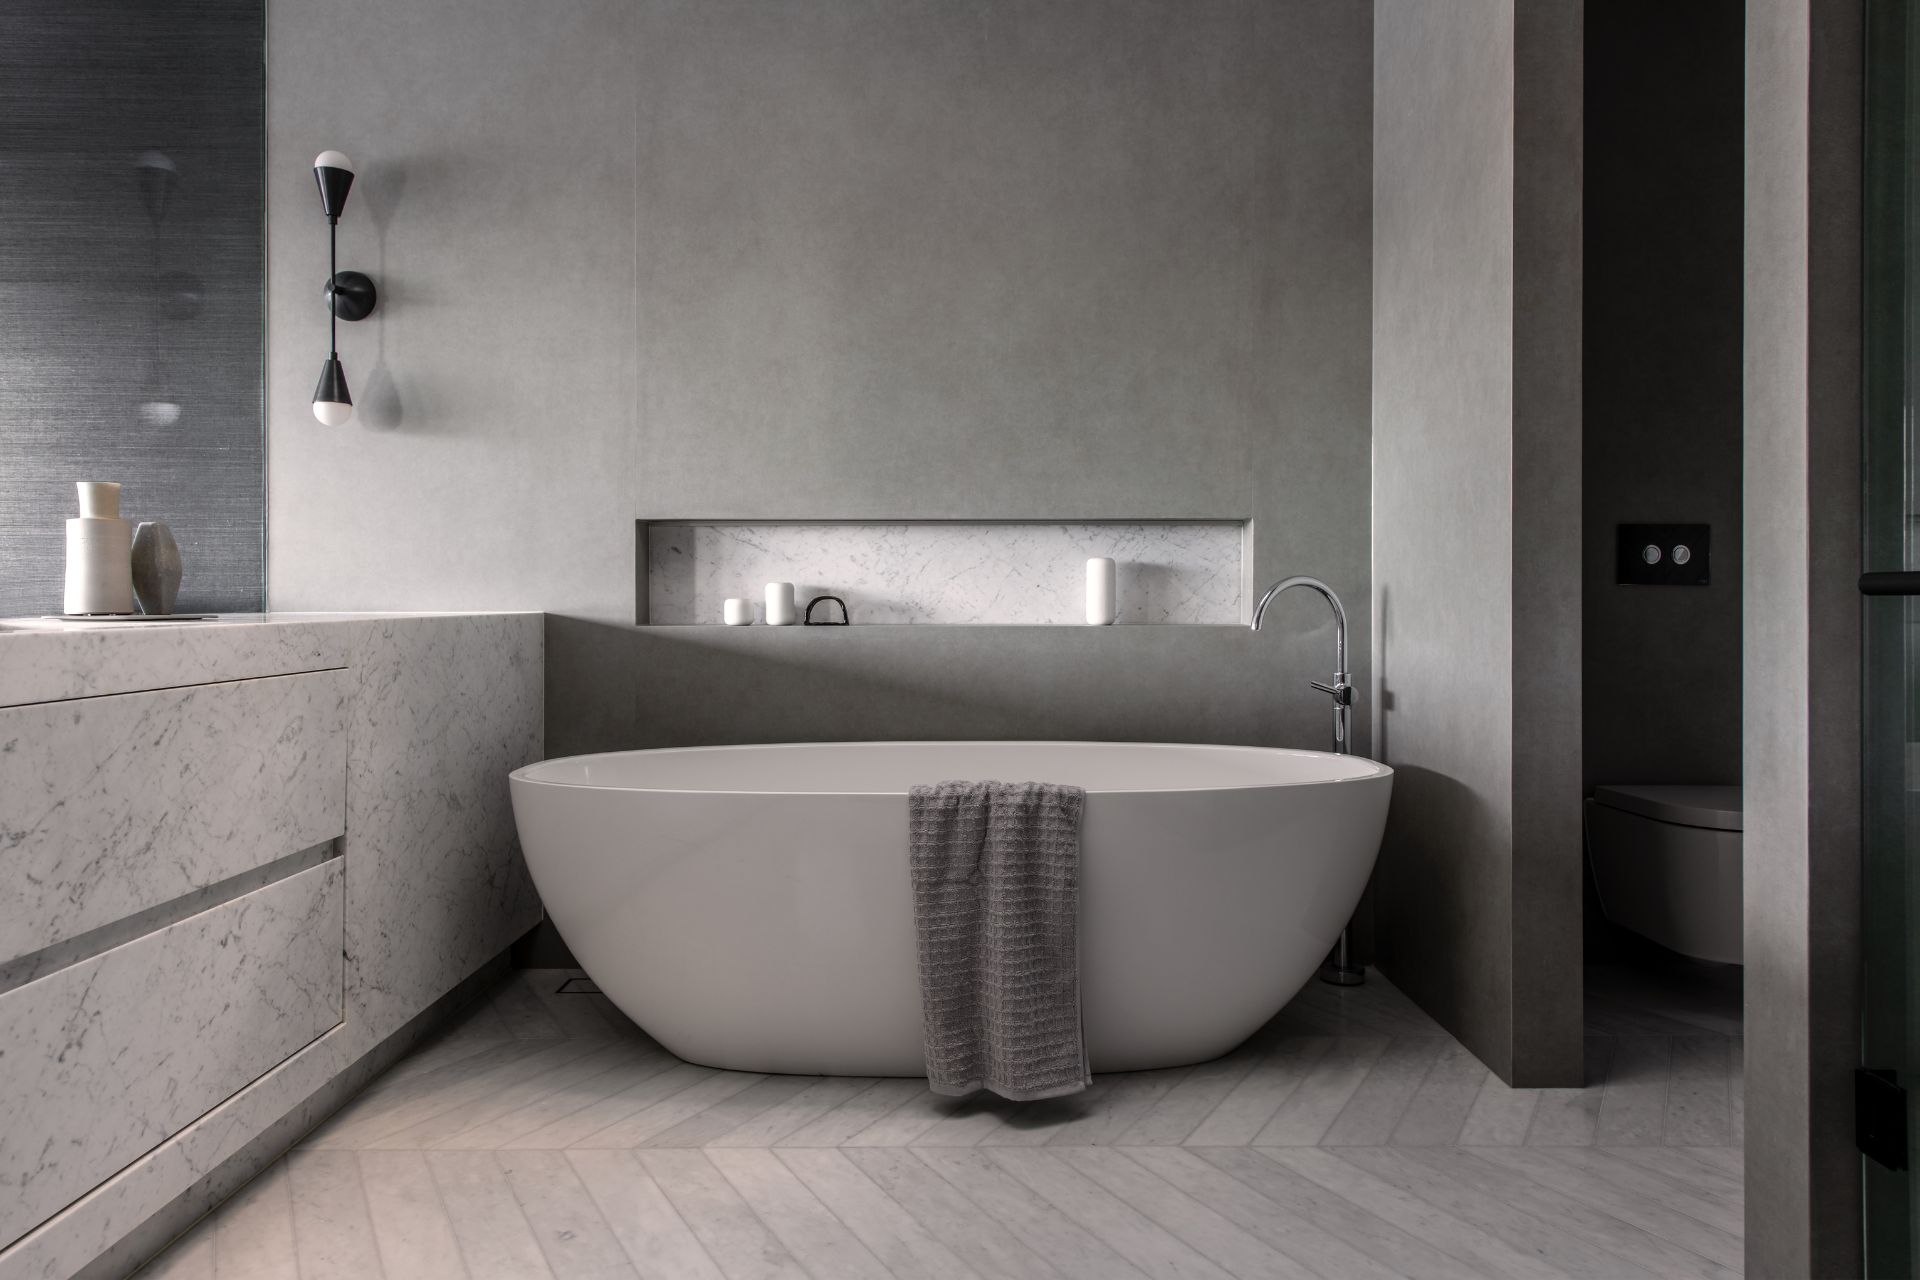 Woolwich Harbour interior design project bath tub